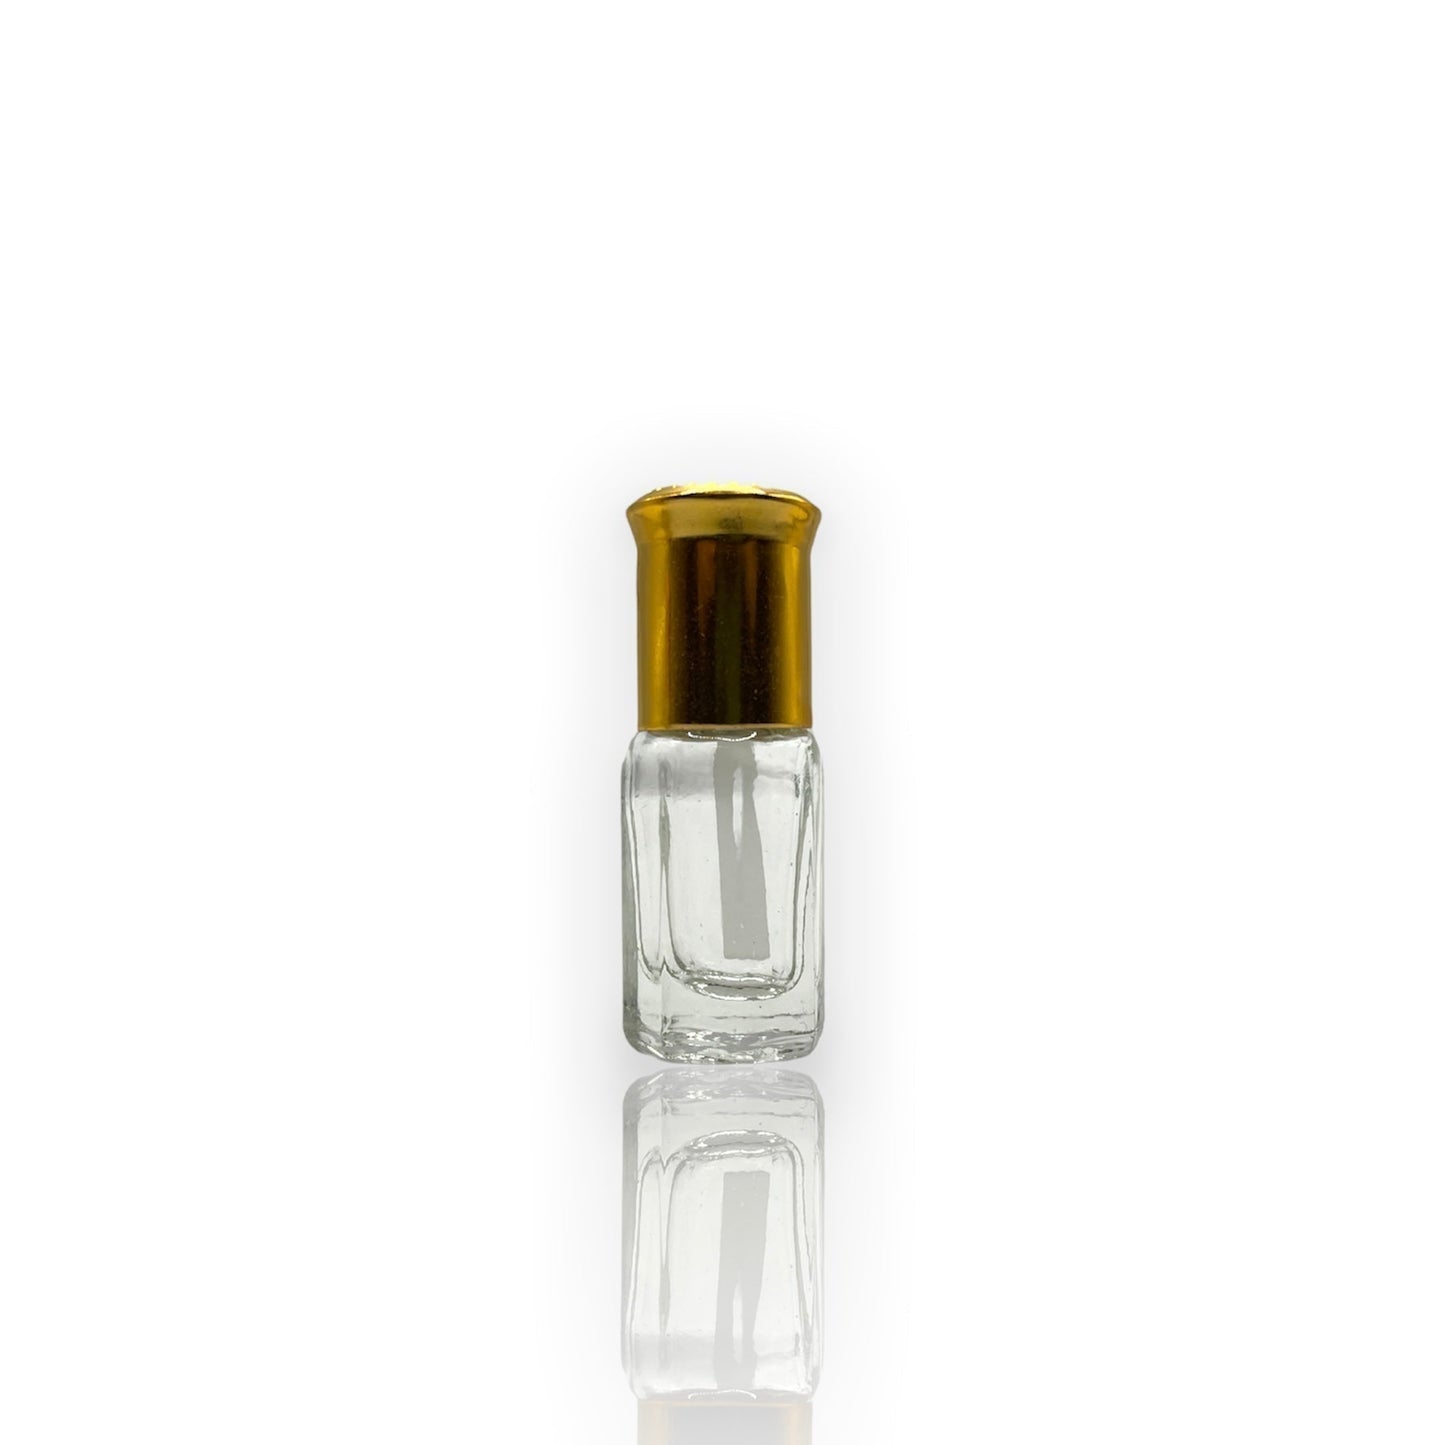 O-03 Oil Perfume *Inspired by Black Musk